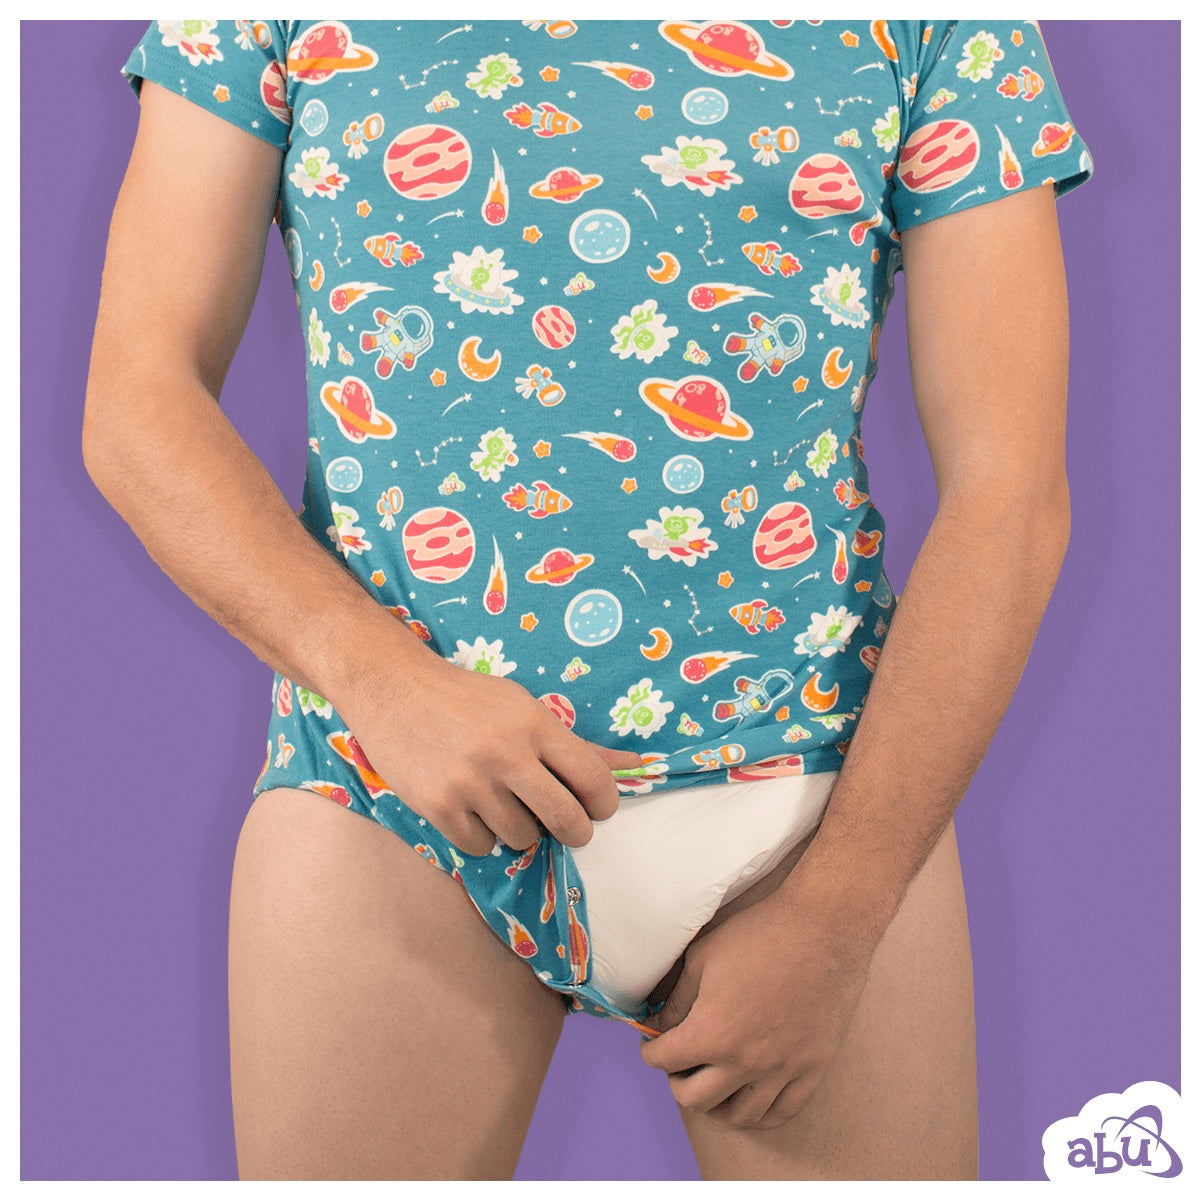 Photo of model wearing space print diapersuit and holding snaps at crotch partially open showing disposable diaper worn underneath.